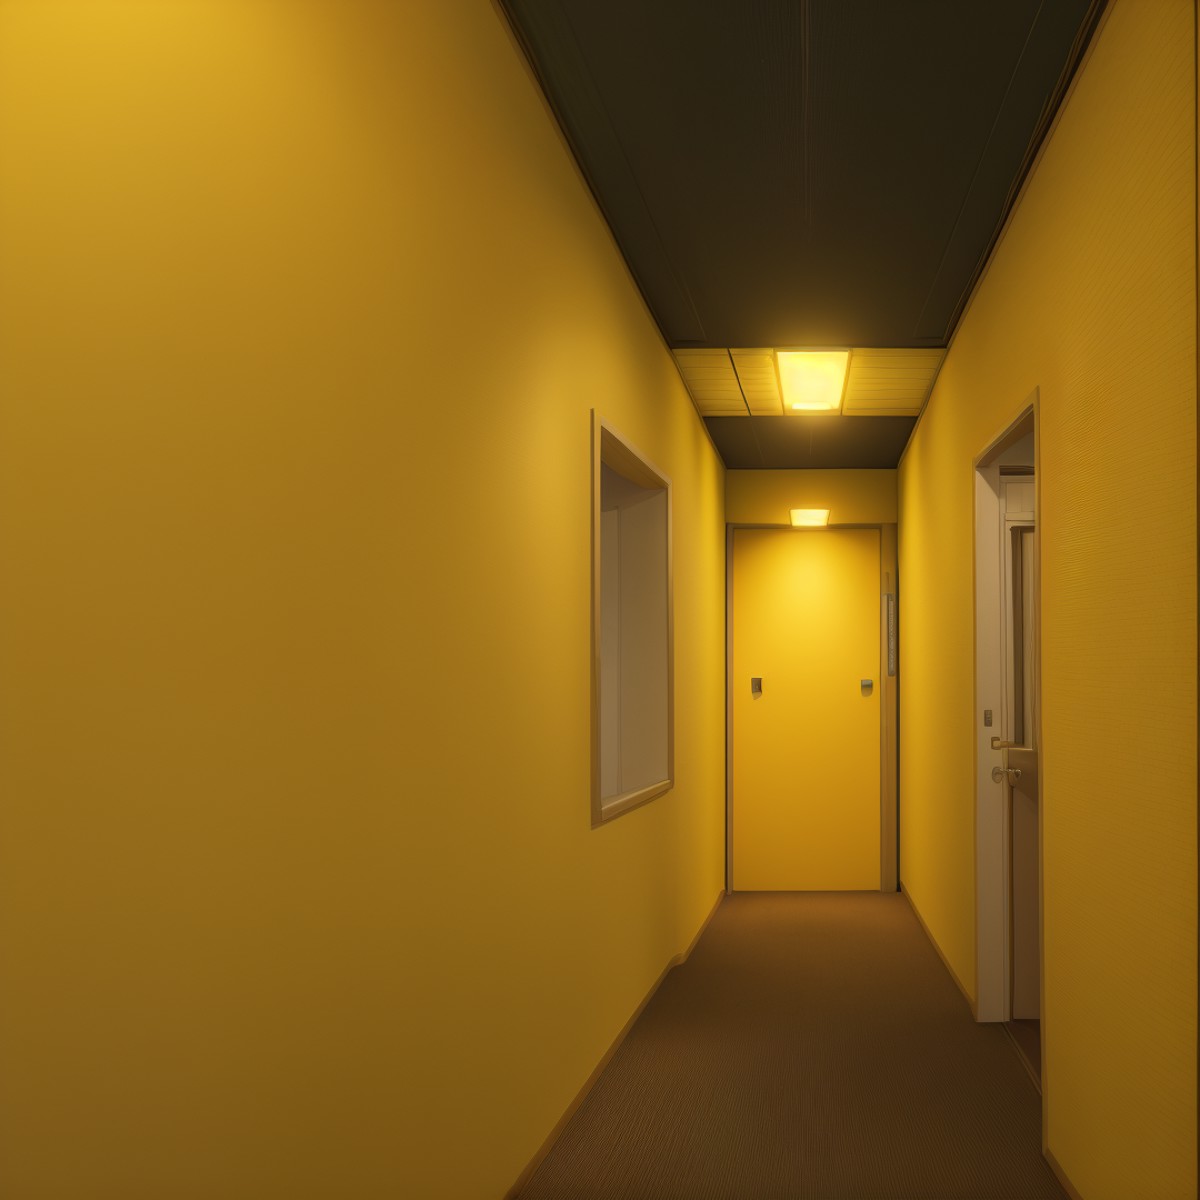 <lora:D1s-Backroom:0.65>, backroom, liminal space, Level-0,Tutorial Level,The Lobby,inside,yellow lighting,yellow wall wit...